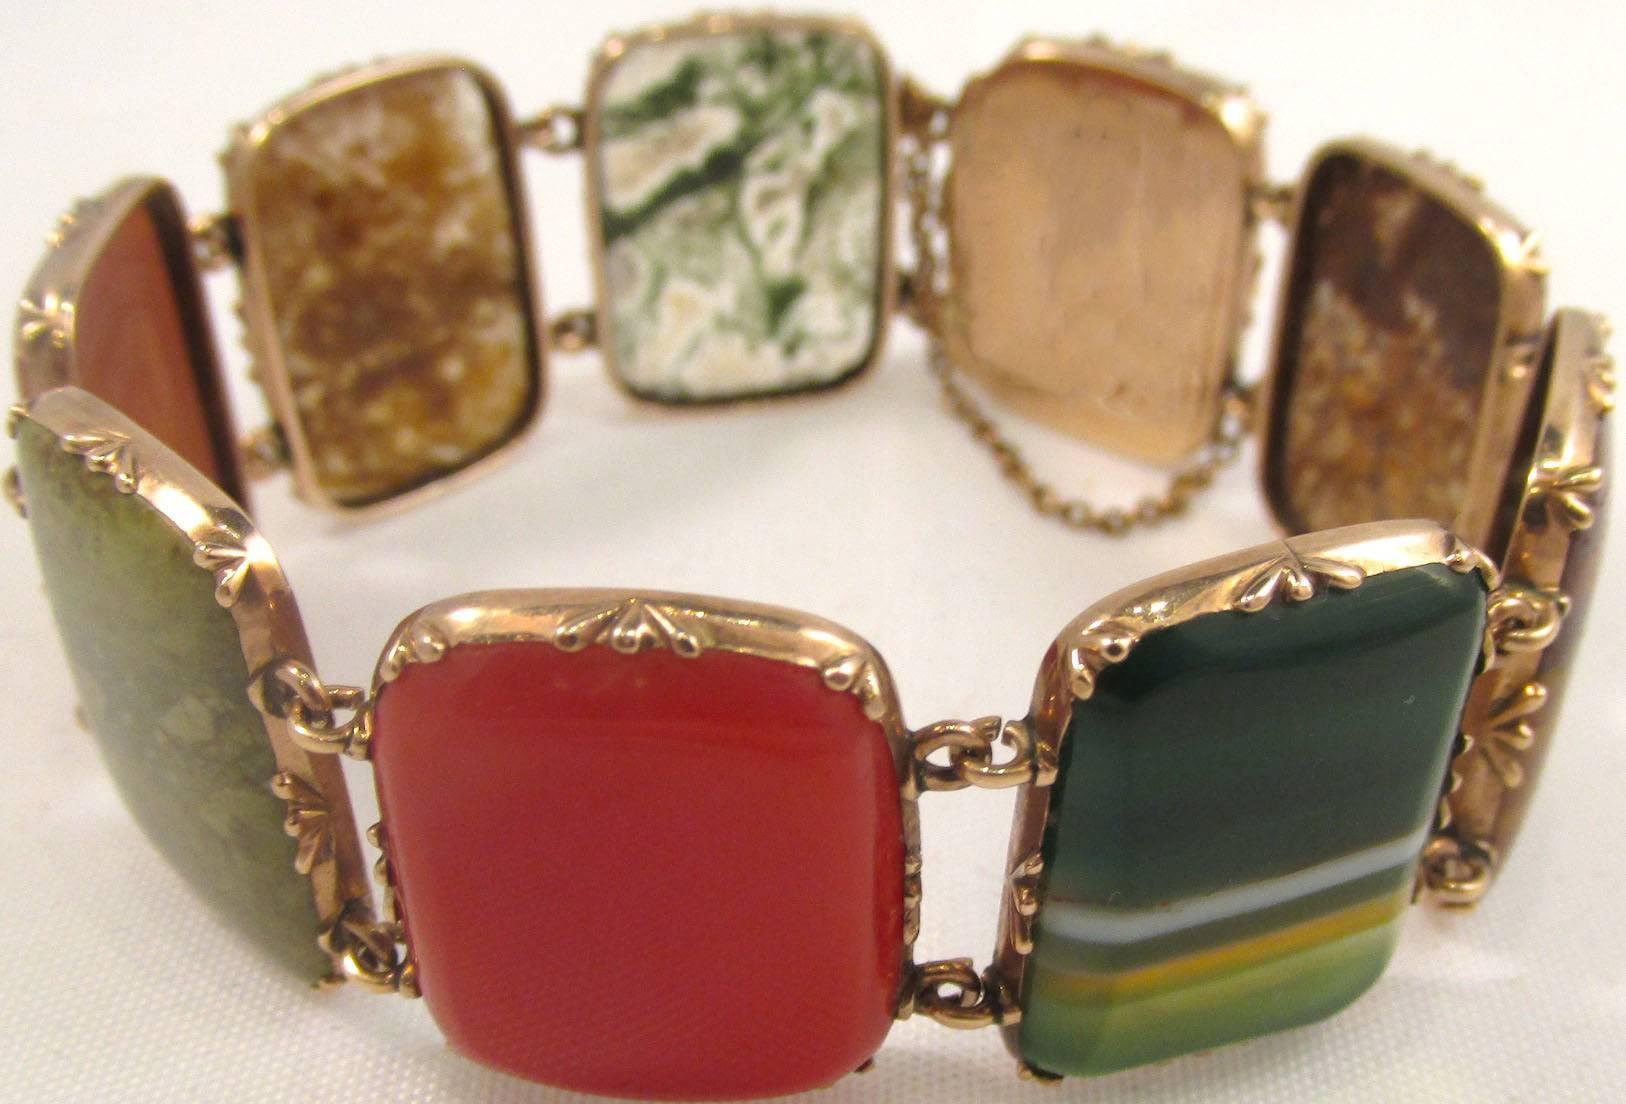 Early Victorian multi-stone agate bracelet in an elaborate setting of 12K gold.
Each stone has it's own unique beauty and charm. Great to wear day or night.
The bracelet measures 6 7/8" long by 7/8" at its widest.